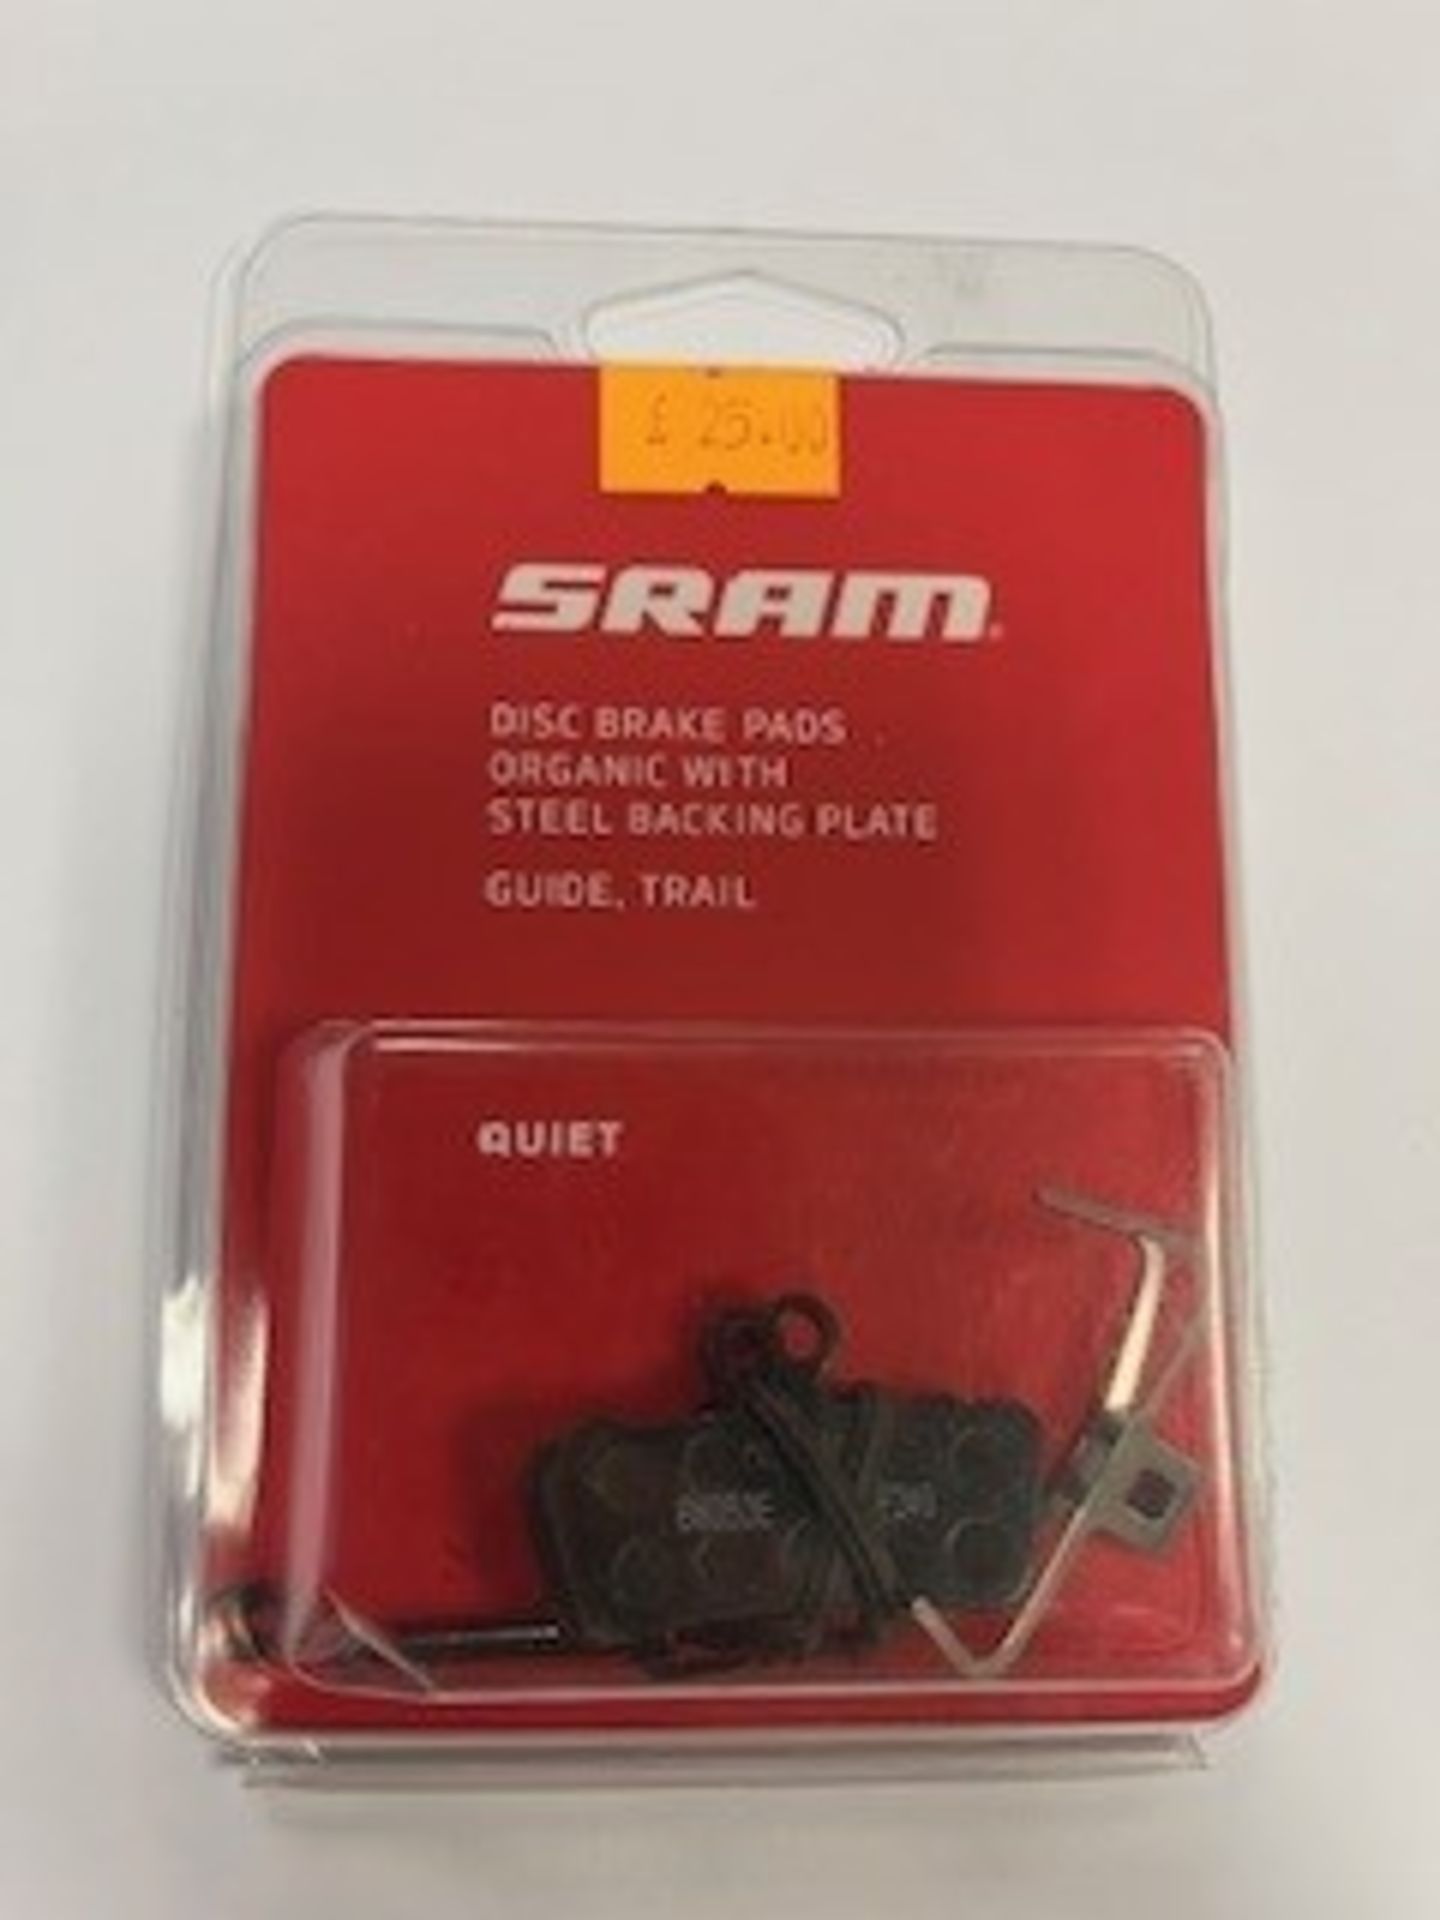 Sram Brake Pads to include 5x Disc Brake Pads Organic with Steel Backing Plate (HRD, LEVEL ULT, LEVE - Image 3 of 9